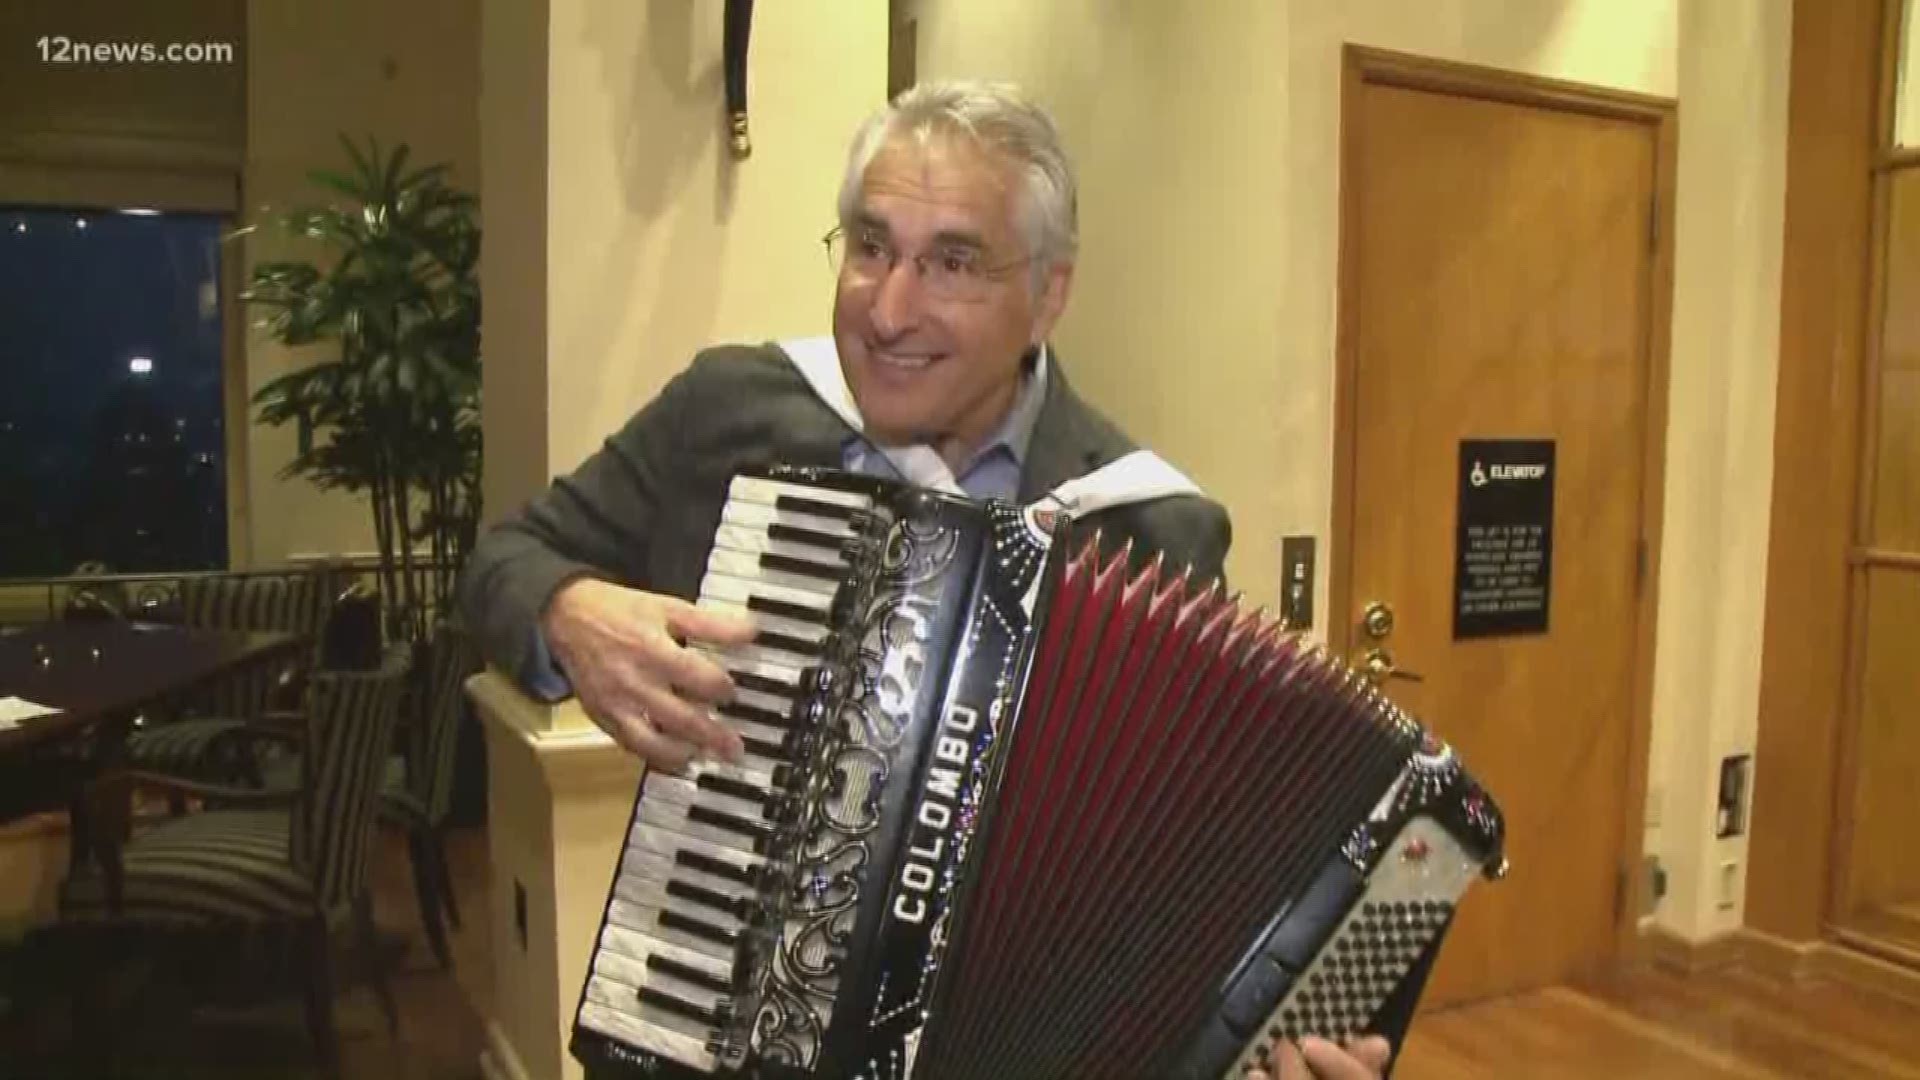 Did you know the accordion is San Francisco's official instrument?